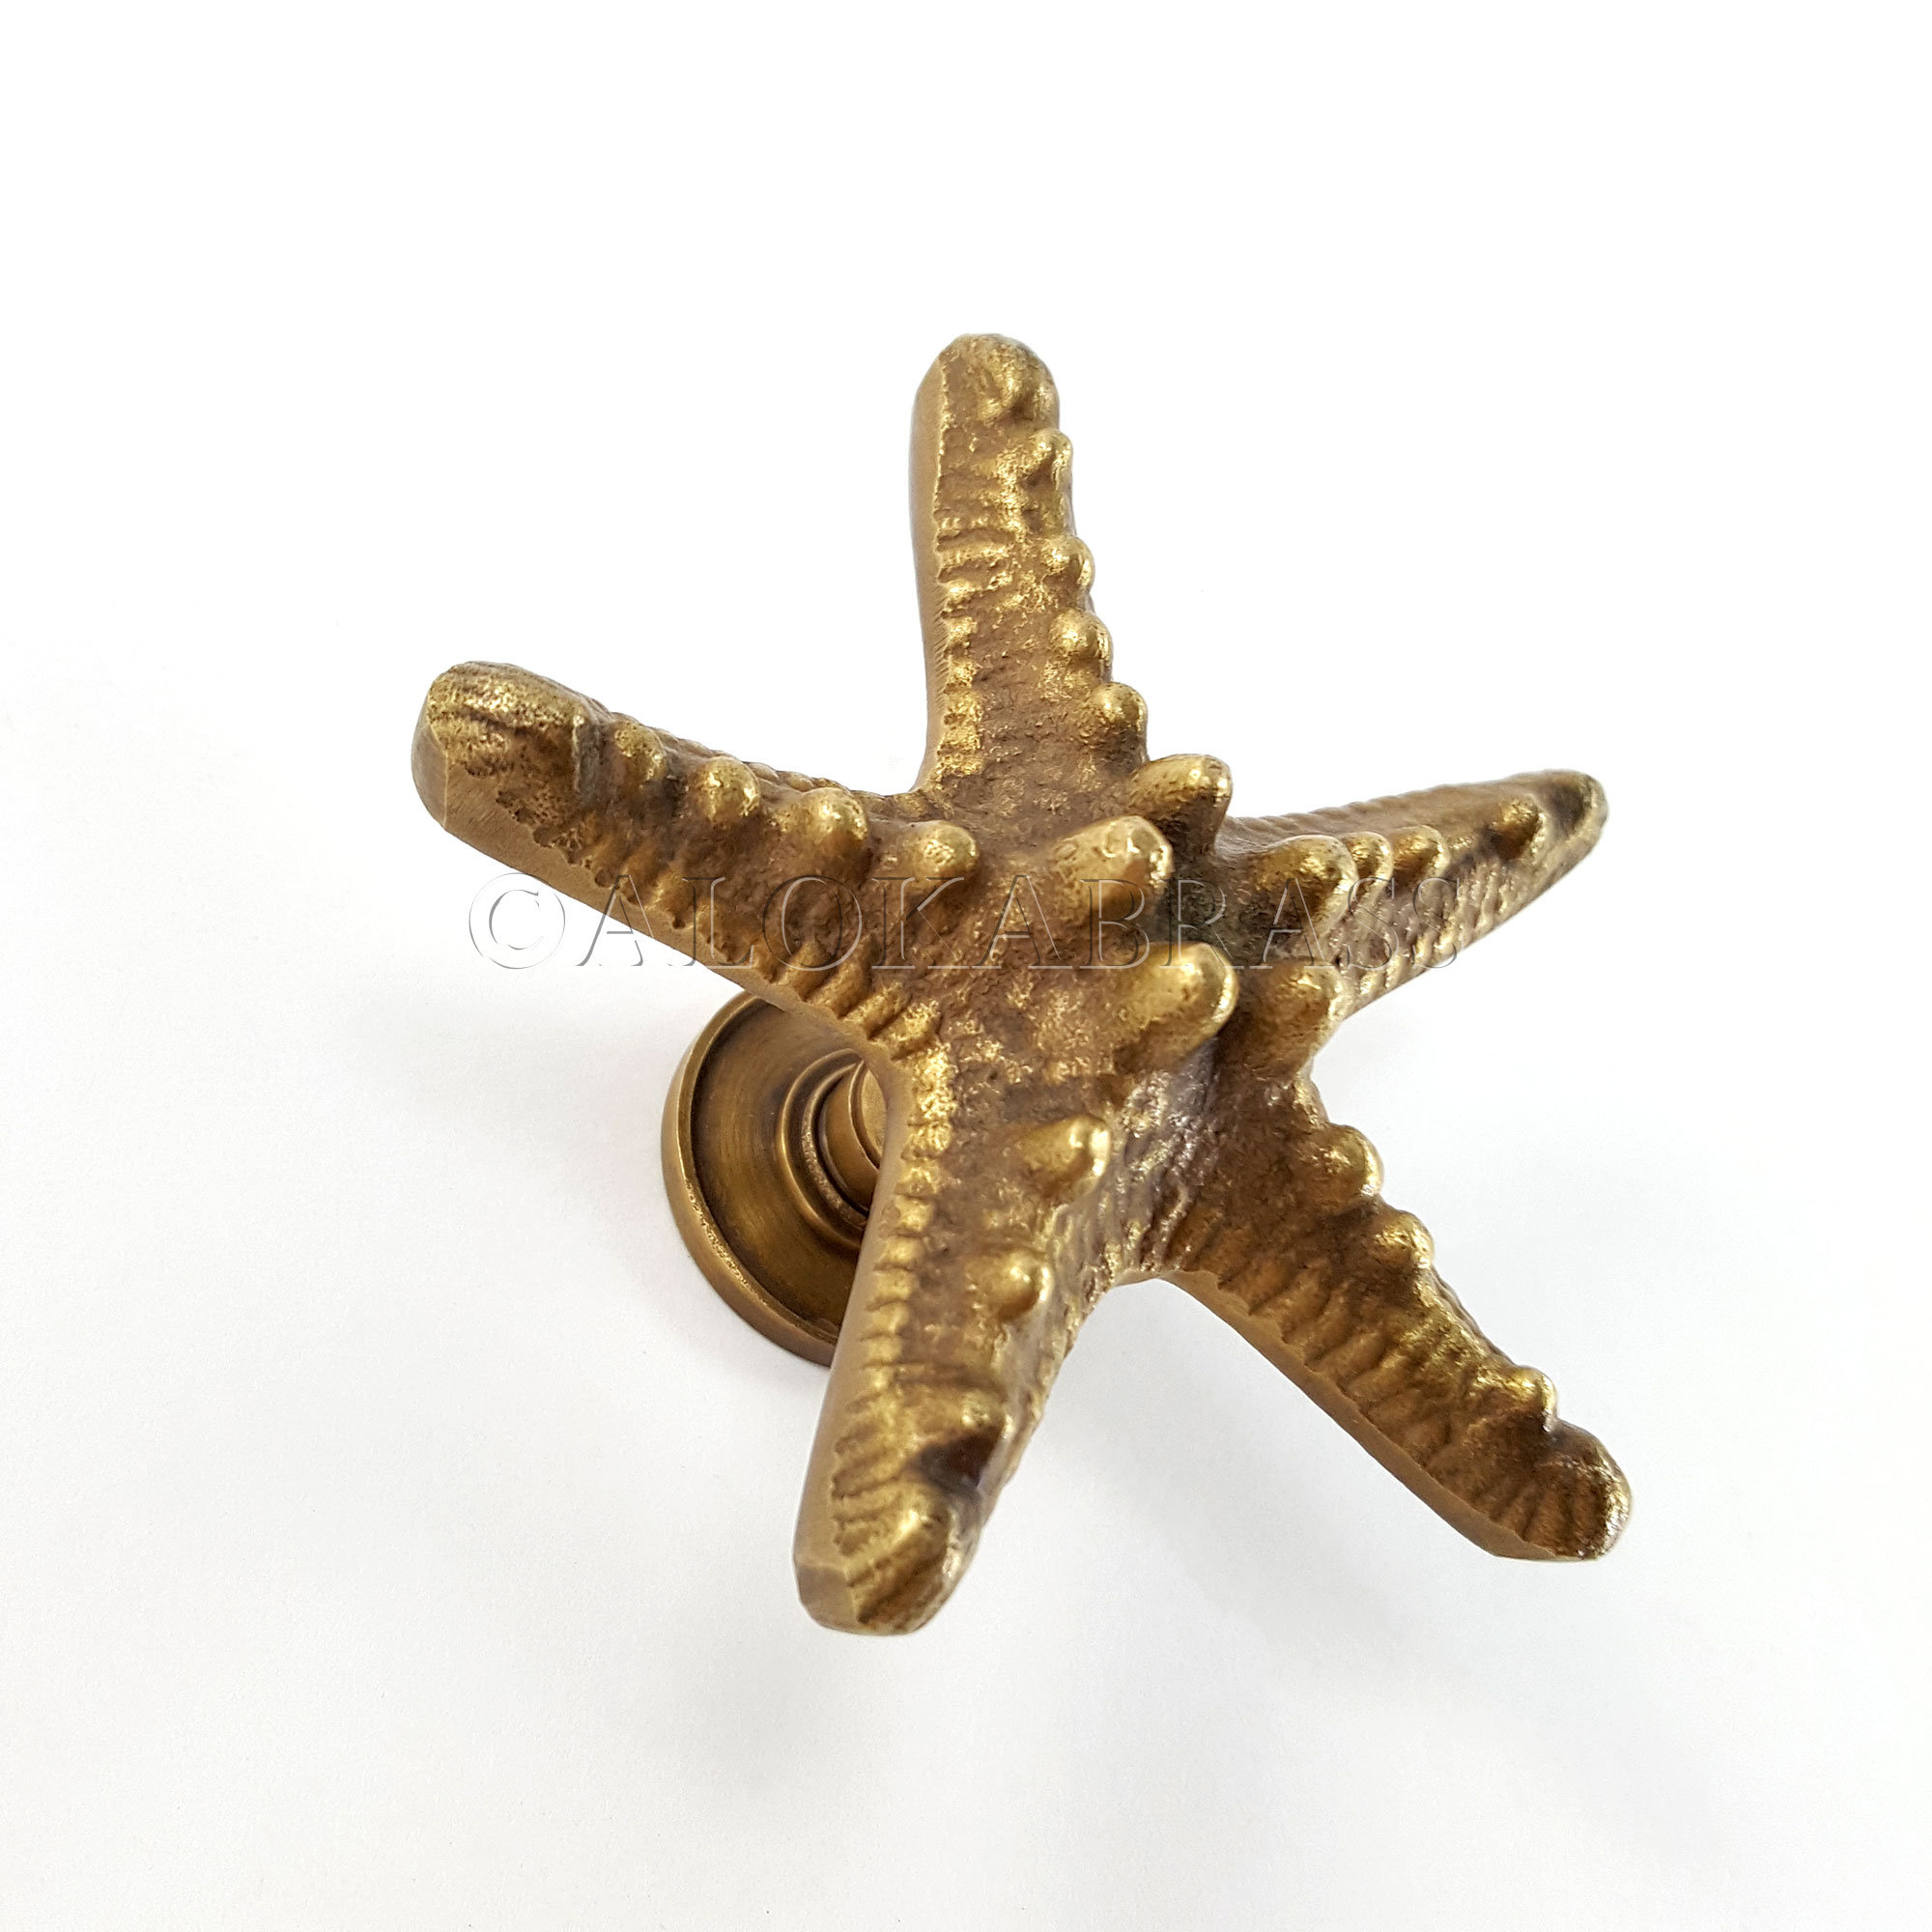 8 solid brass Star Fish Solid Brass 7 cm Knobs Drawers Cabinet Vintage Style Sea Side Knob 2.34 inch many finishes